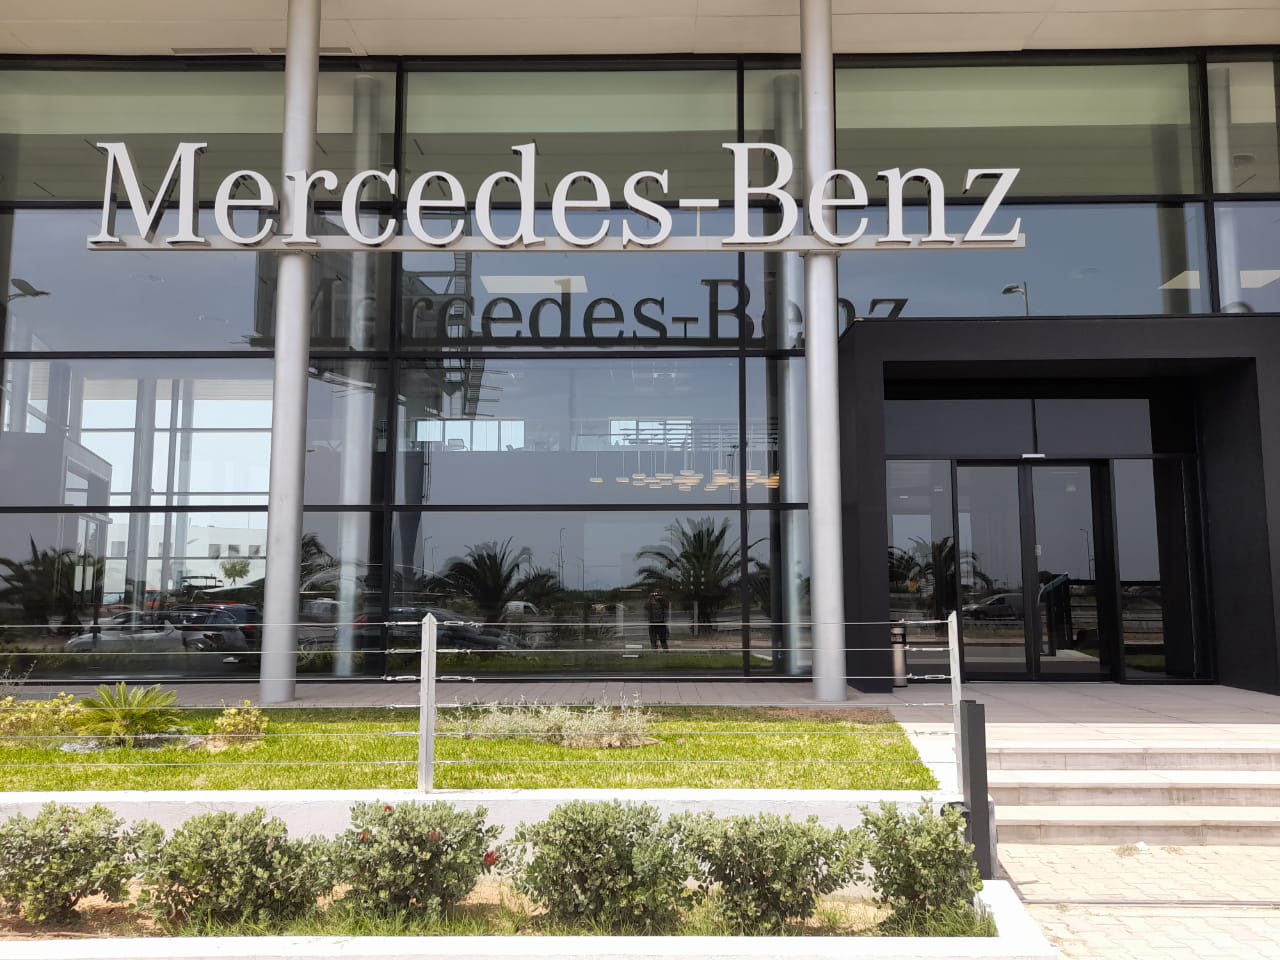 MERCEDES SHOWROOMWhatsApp Image 2021-05-27 at 14.56.11 (1)